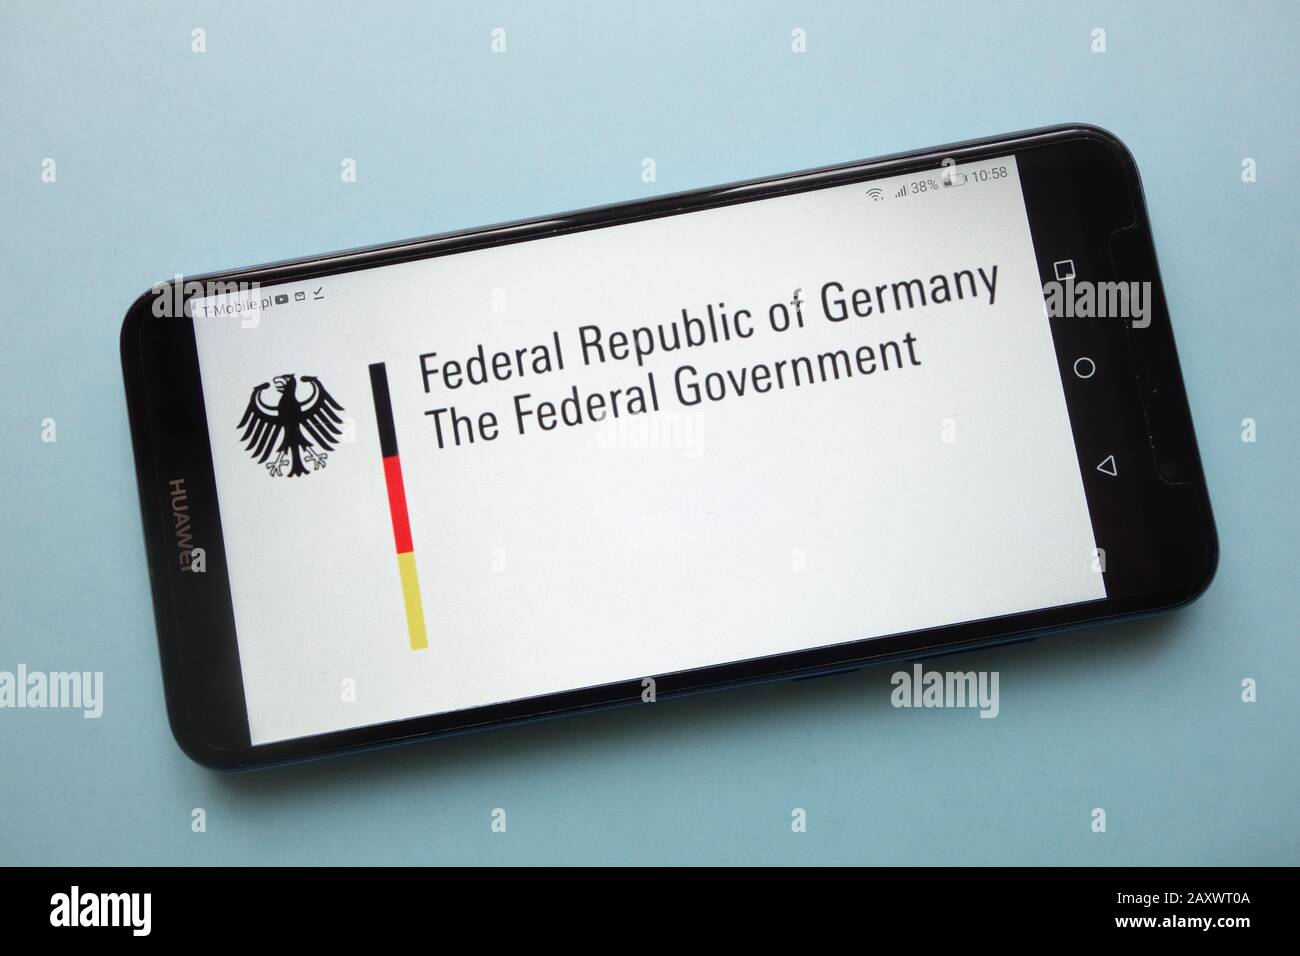 The Federal Government of Germany logo displayed on smartphone Stock Photo